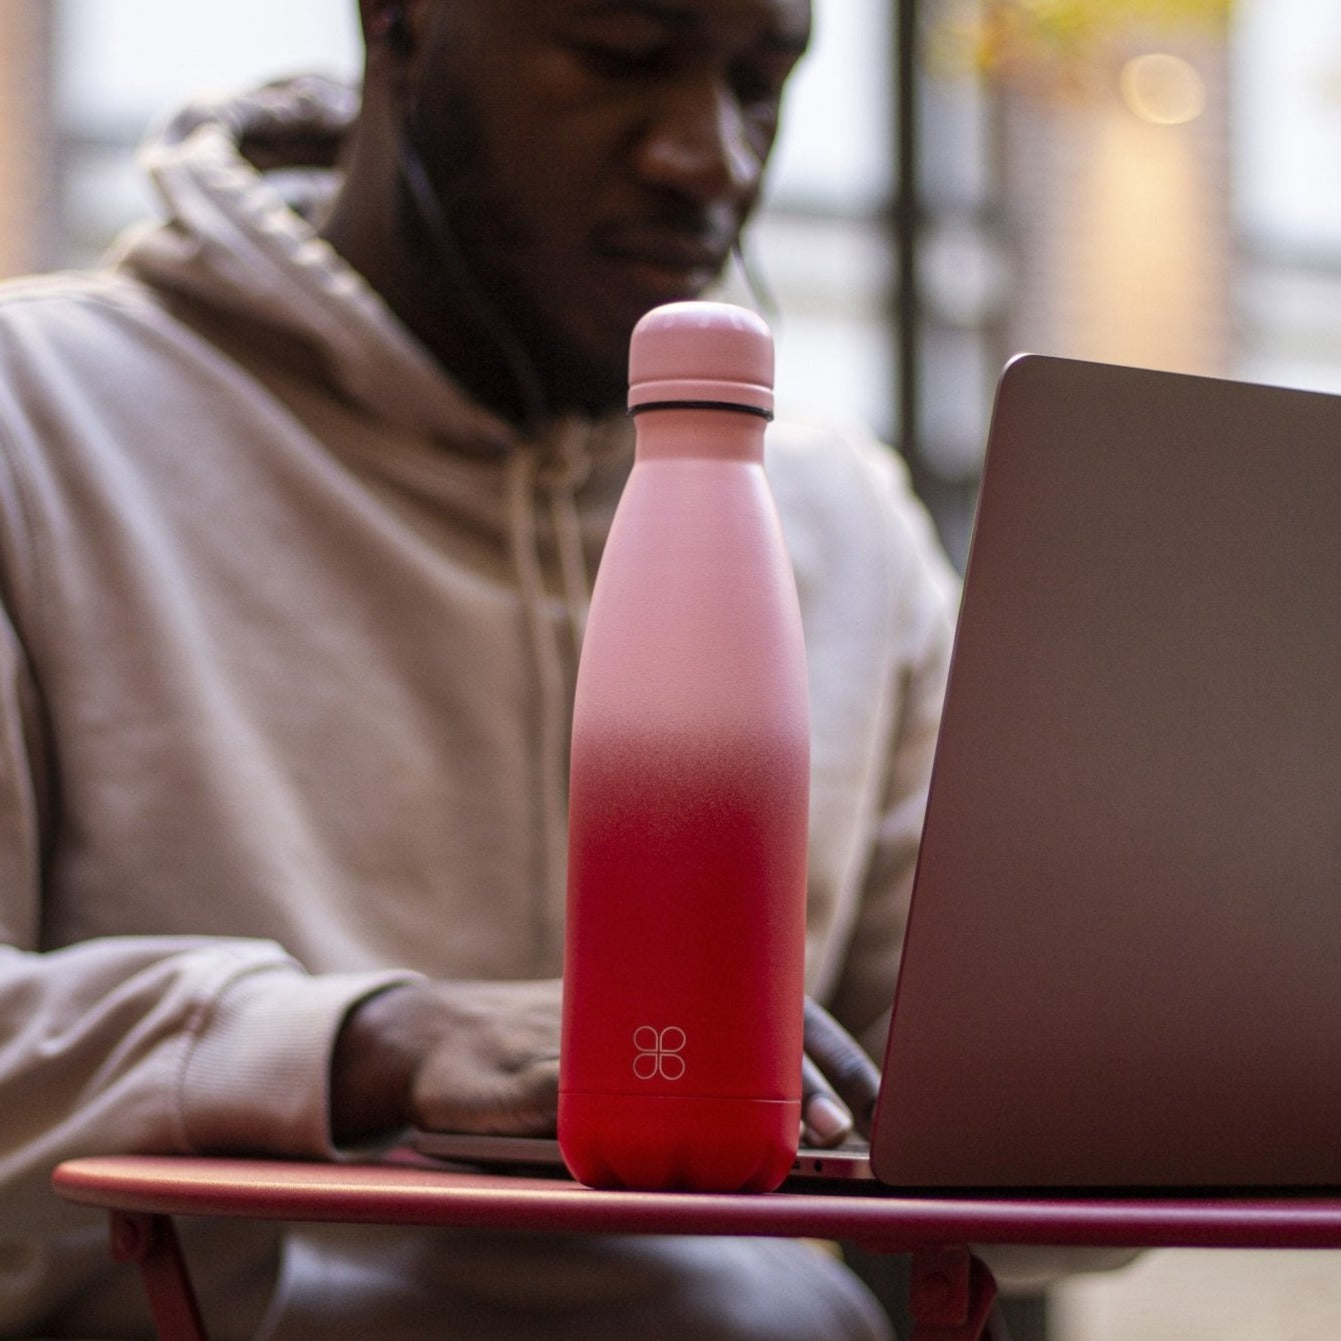 Man concentrates on an apple laptop with a red and pink stainless steel bottle 500ml